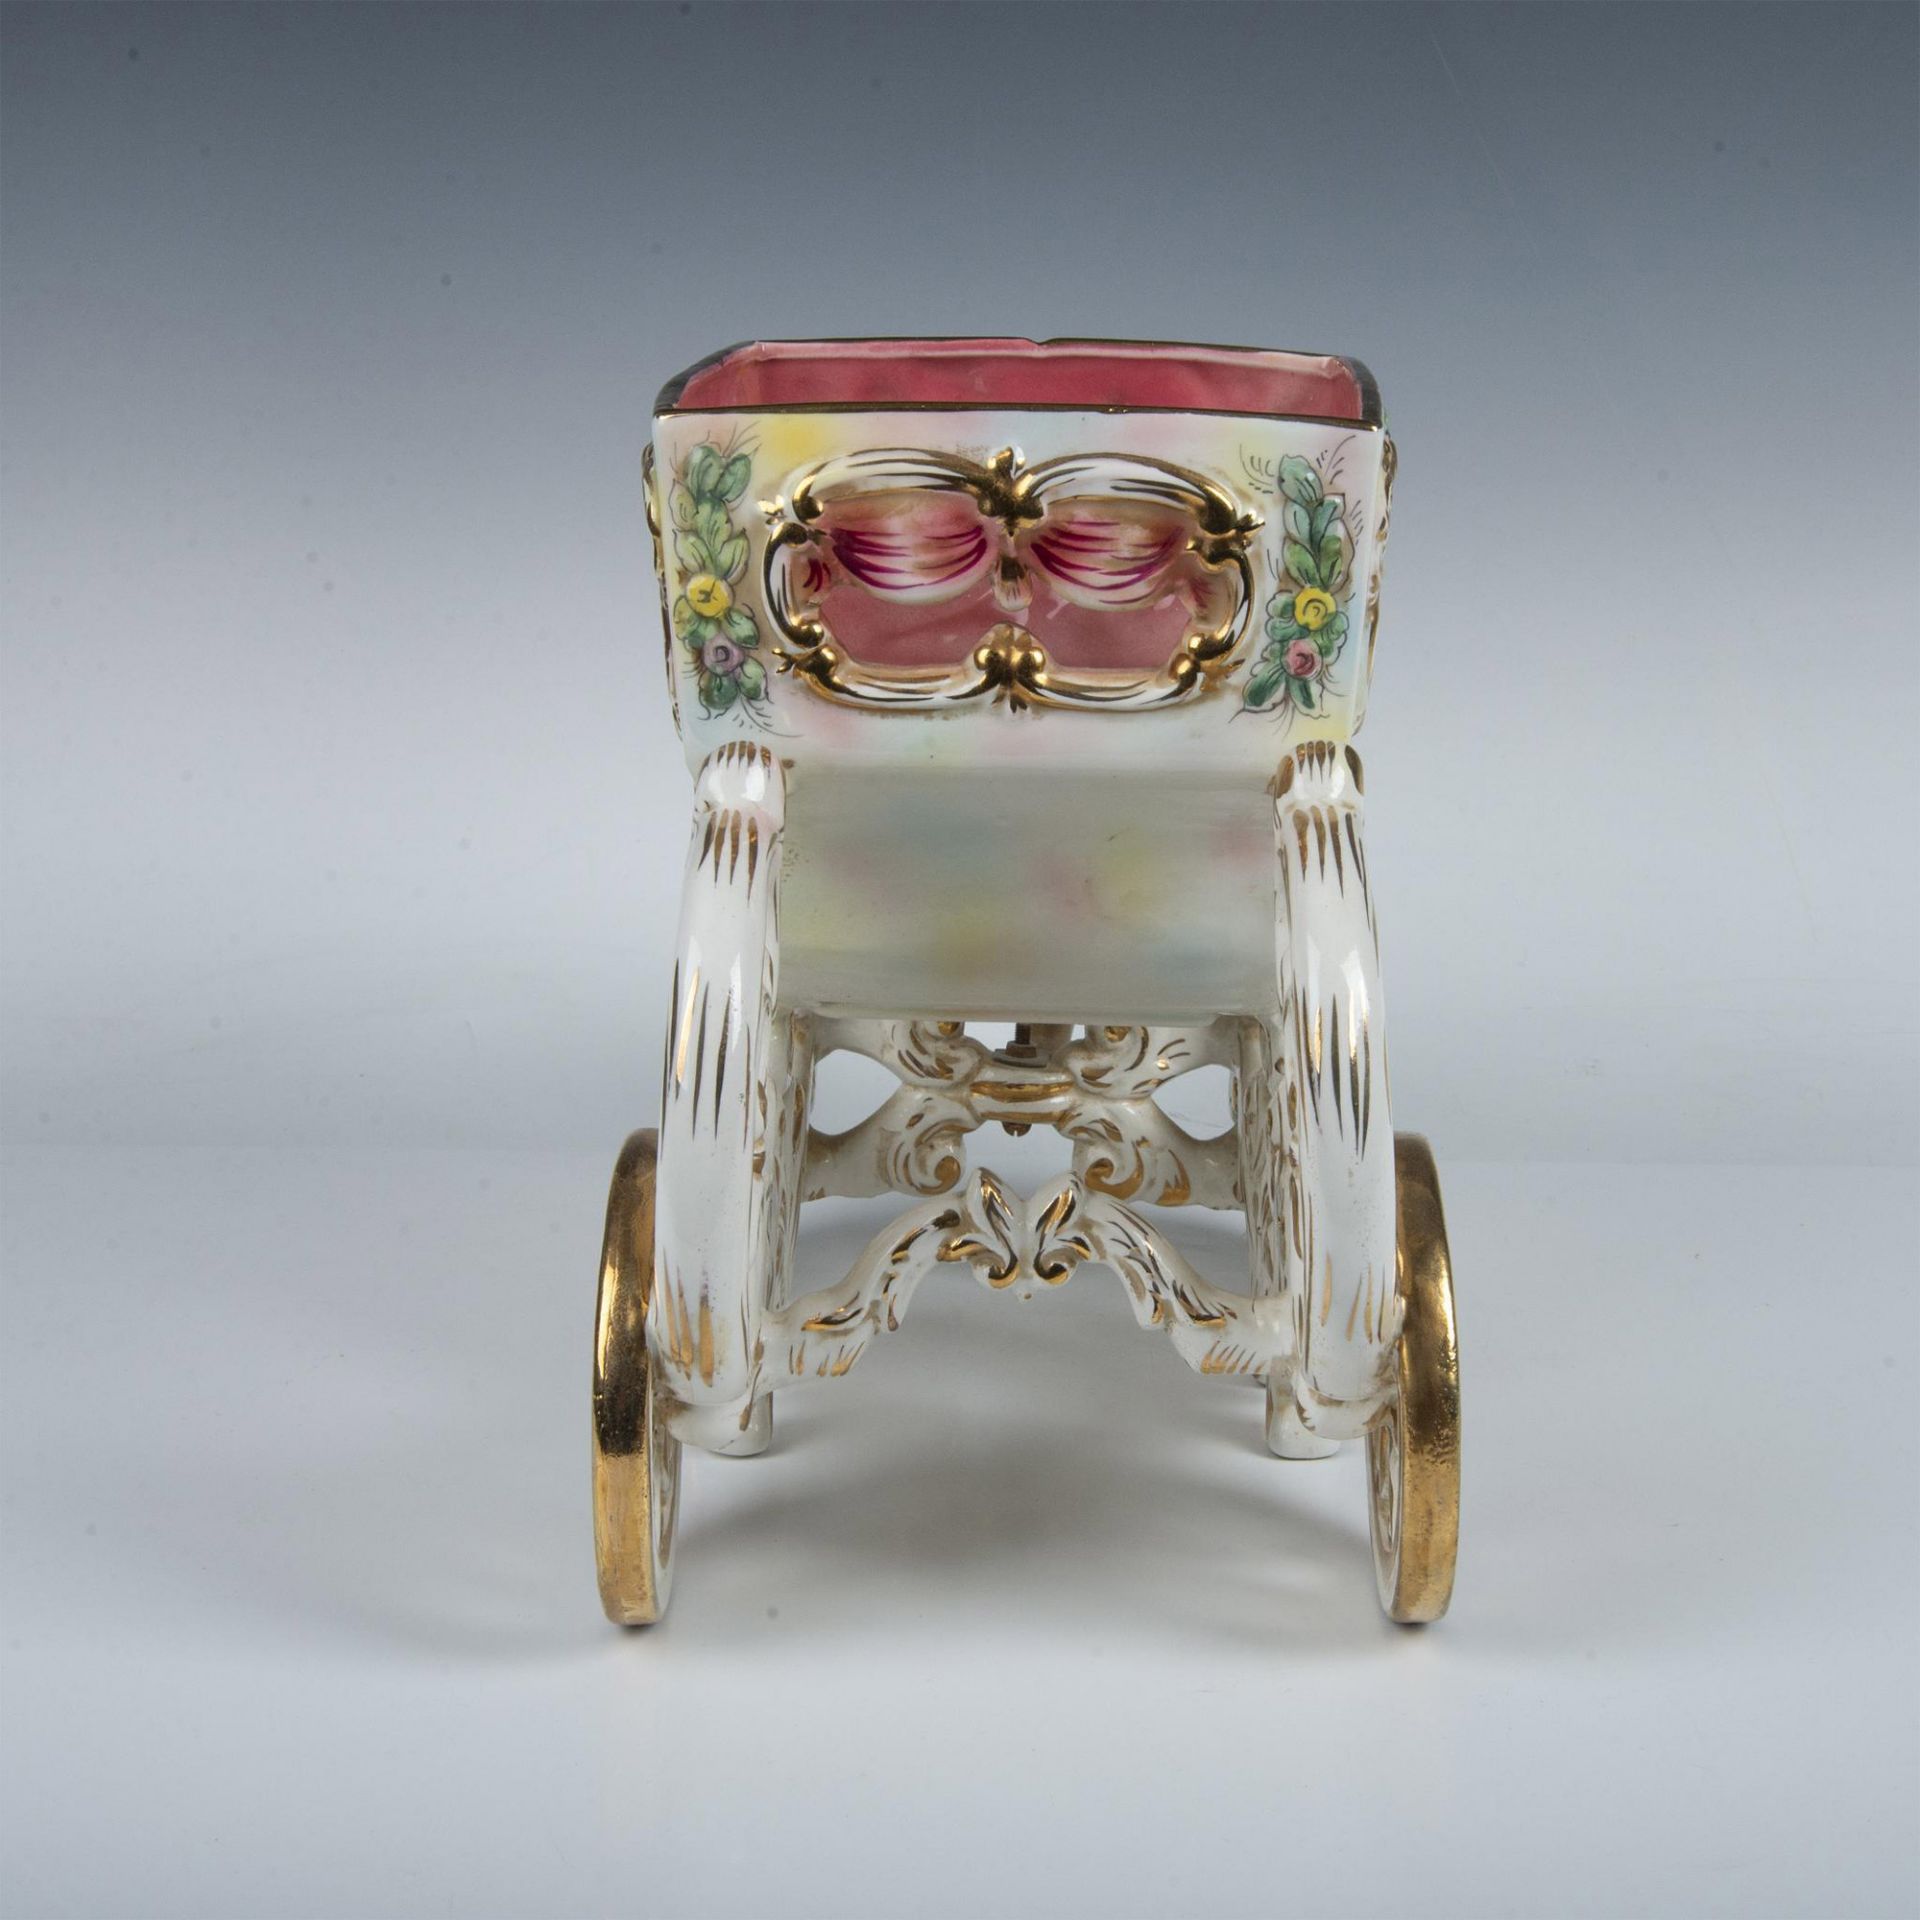 Capodimonte Hand Painted Porcelain Princess Carriage Coach - Image 6 of 8